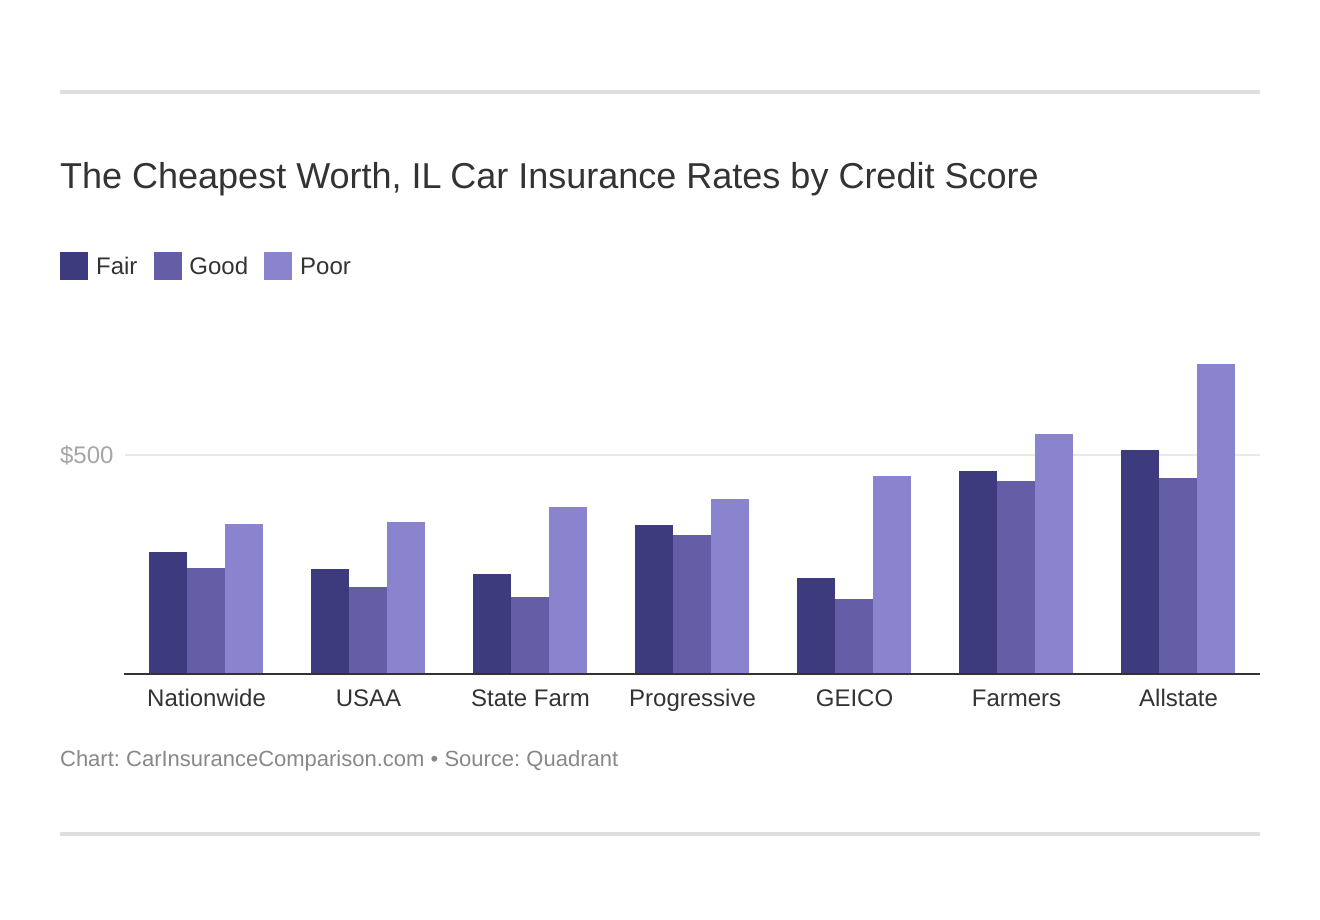 The Cheapest Worth, IL Car Insurance Rates by Credit Score